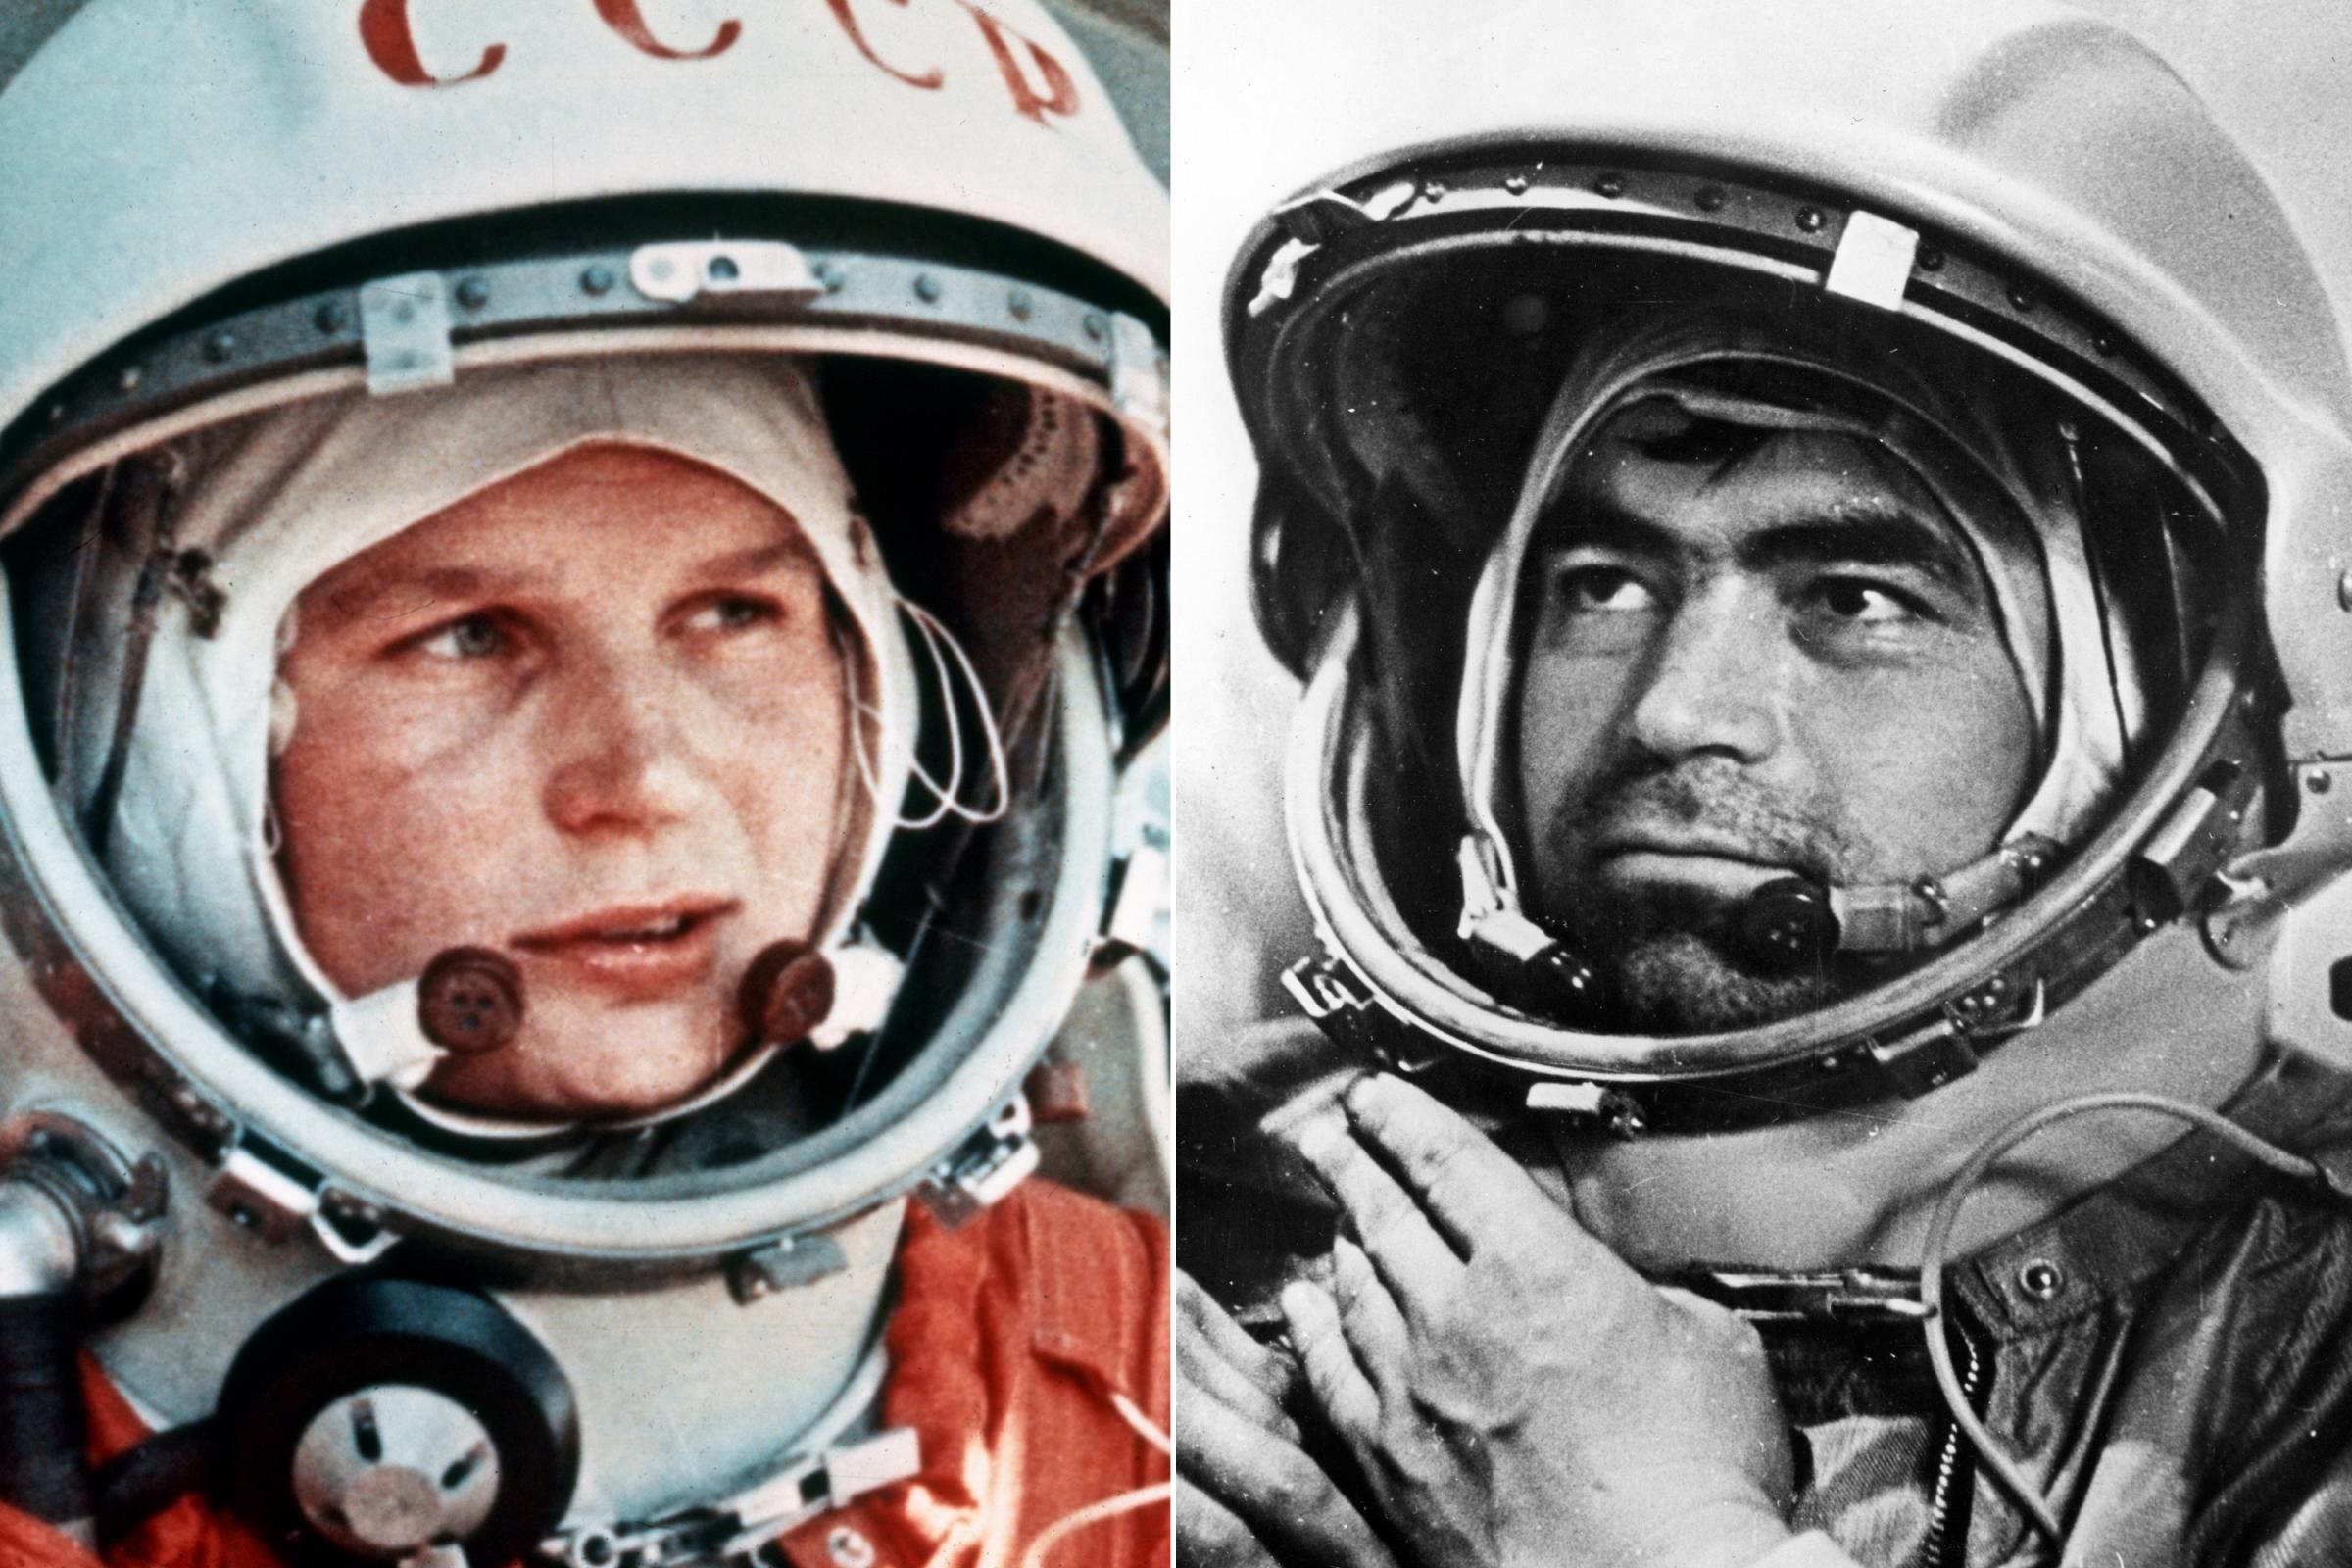 Soviet cosmonauts Valentina Tereshkova and Andrian Nikolayev were married on Nov. 3, 1963. Tereshkova was launched aboard Vostok 6 on June 16, 1963, becoming the first woman to fly in space. Andrian Nikolayev fly on two space flights during his career, Vostok 3 and Soyuz 9. The pair had one daughter, however were divorced in 1982.